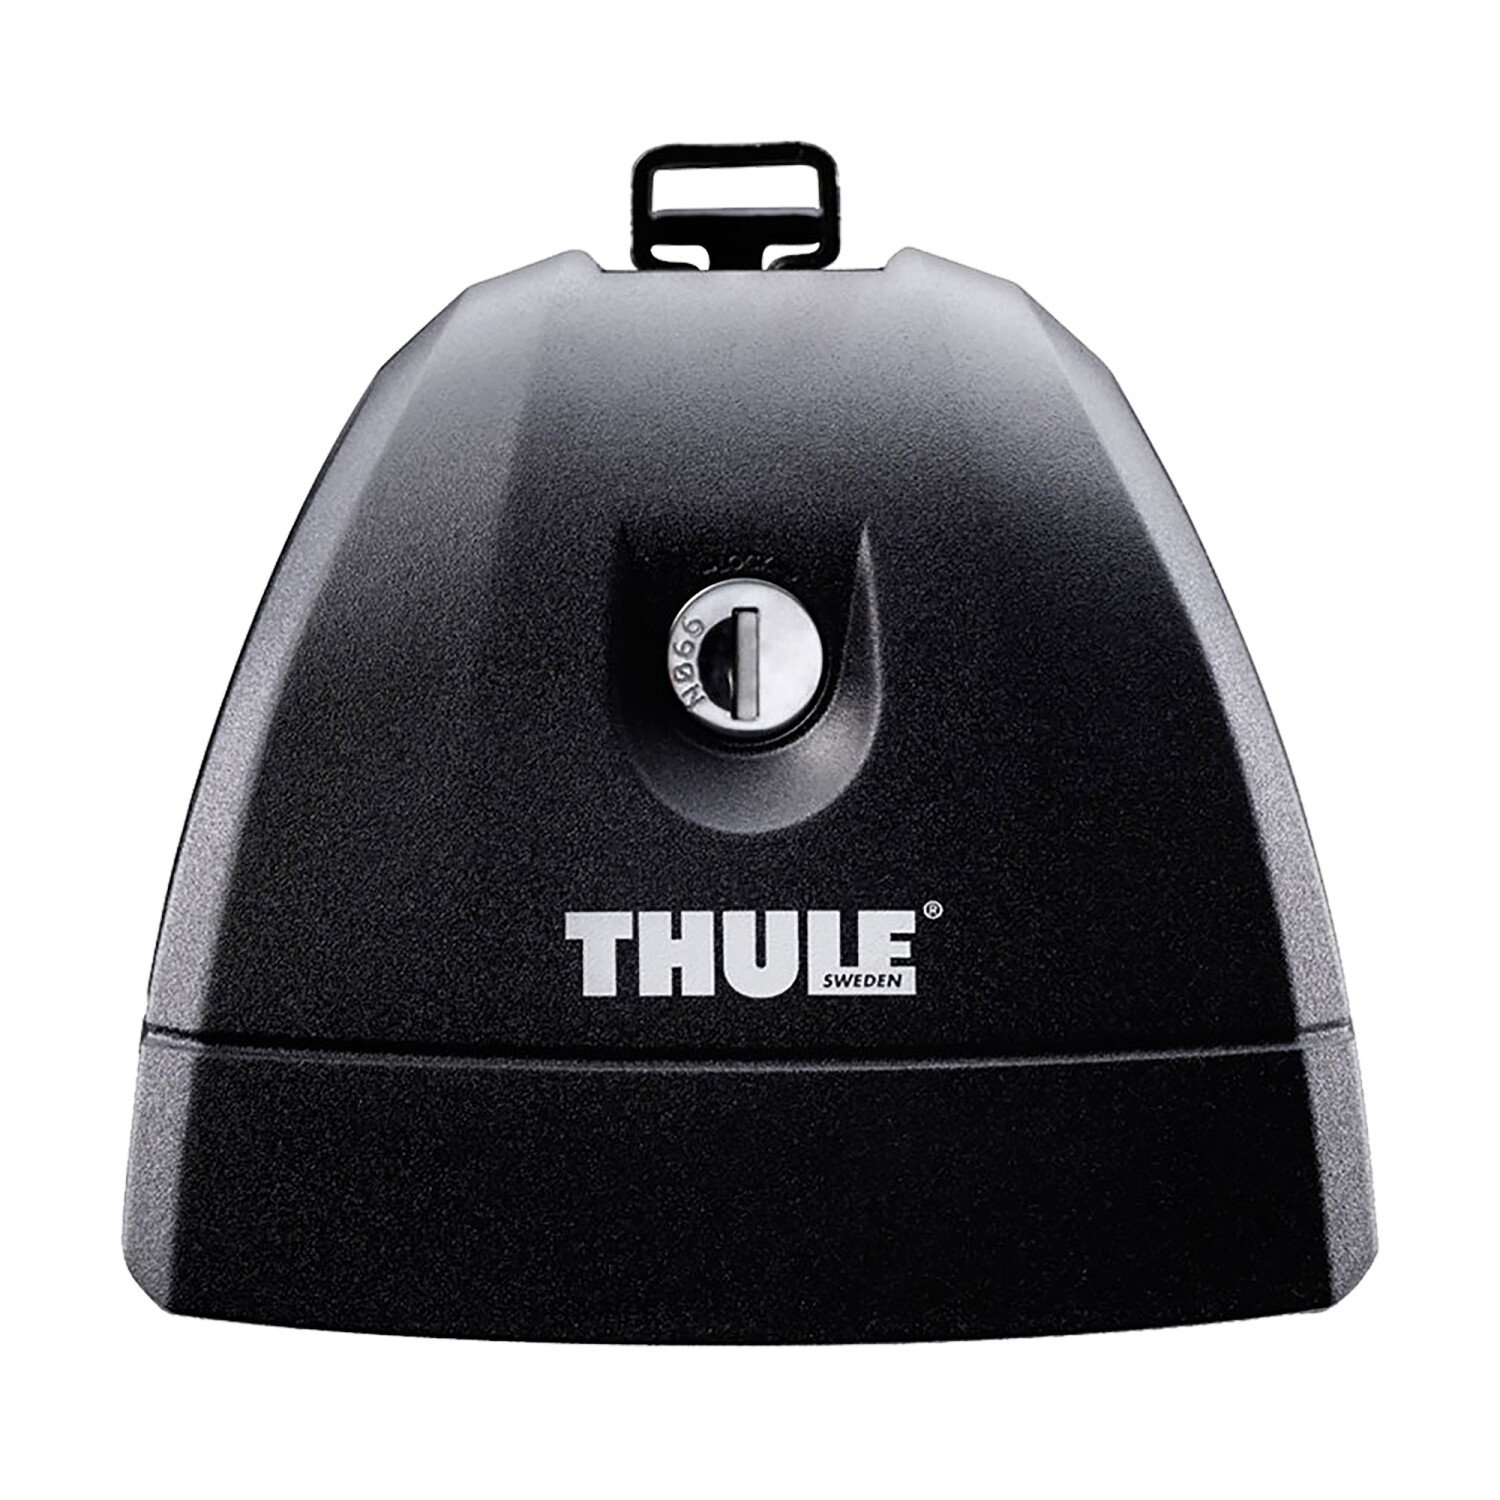 Photos - Roof Box Thule Rapid System 7511 